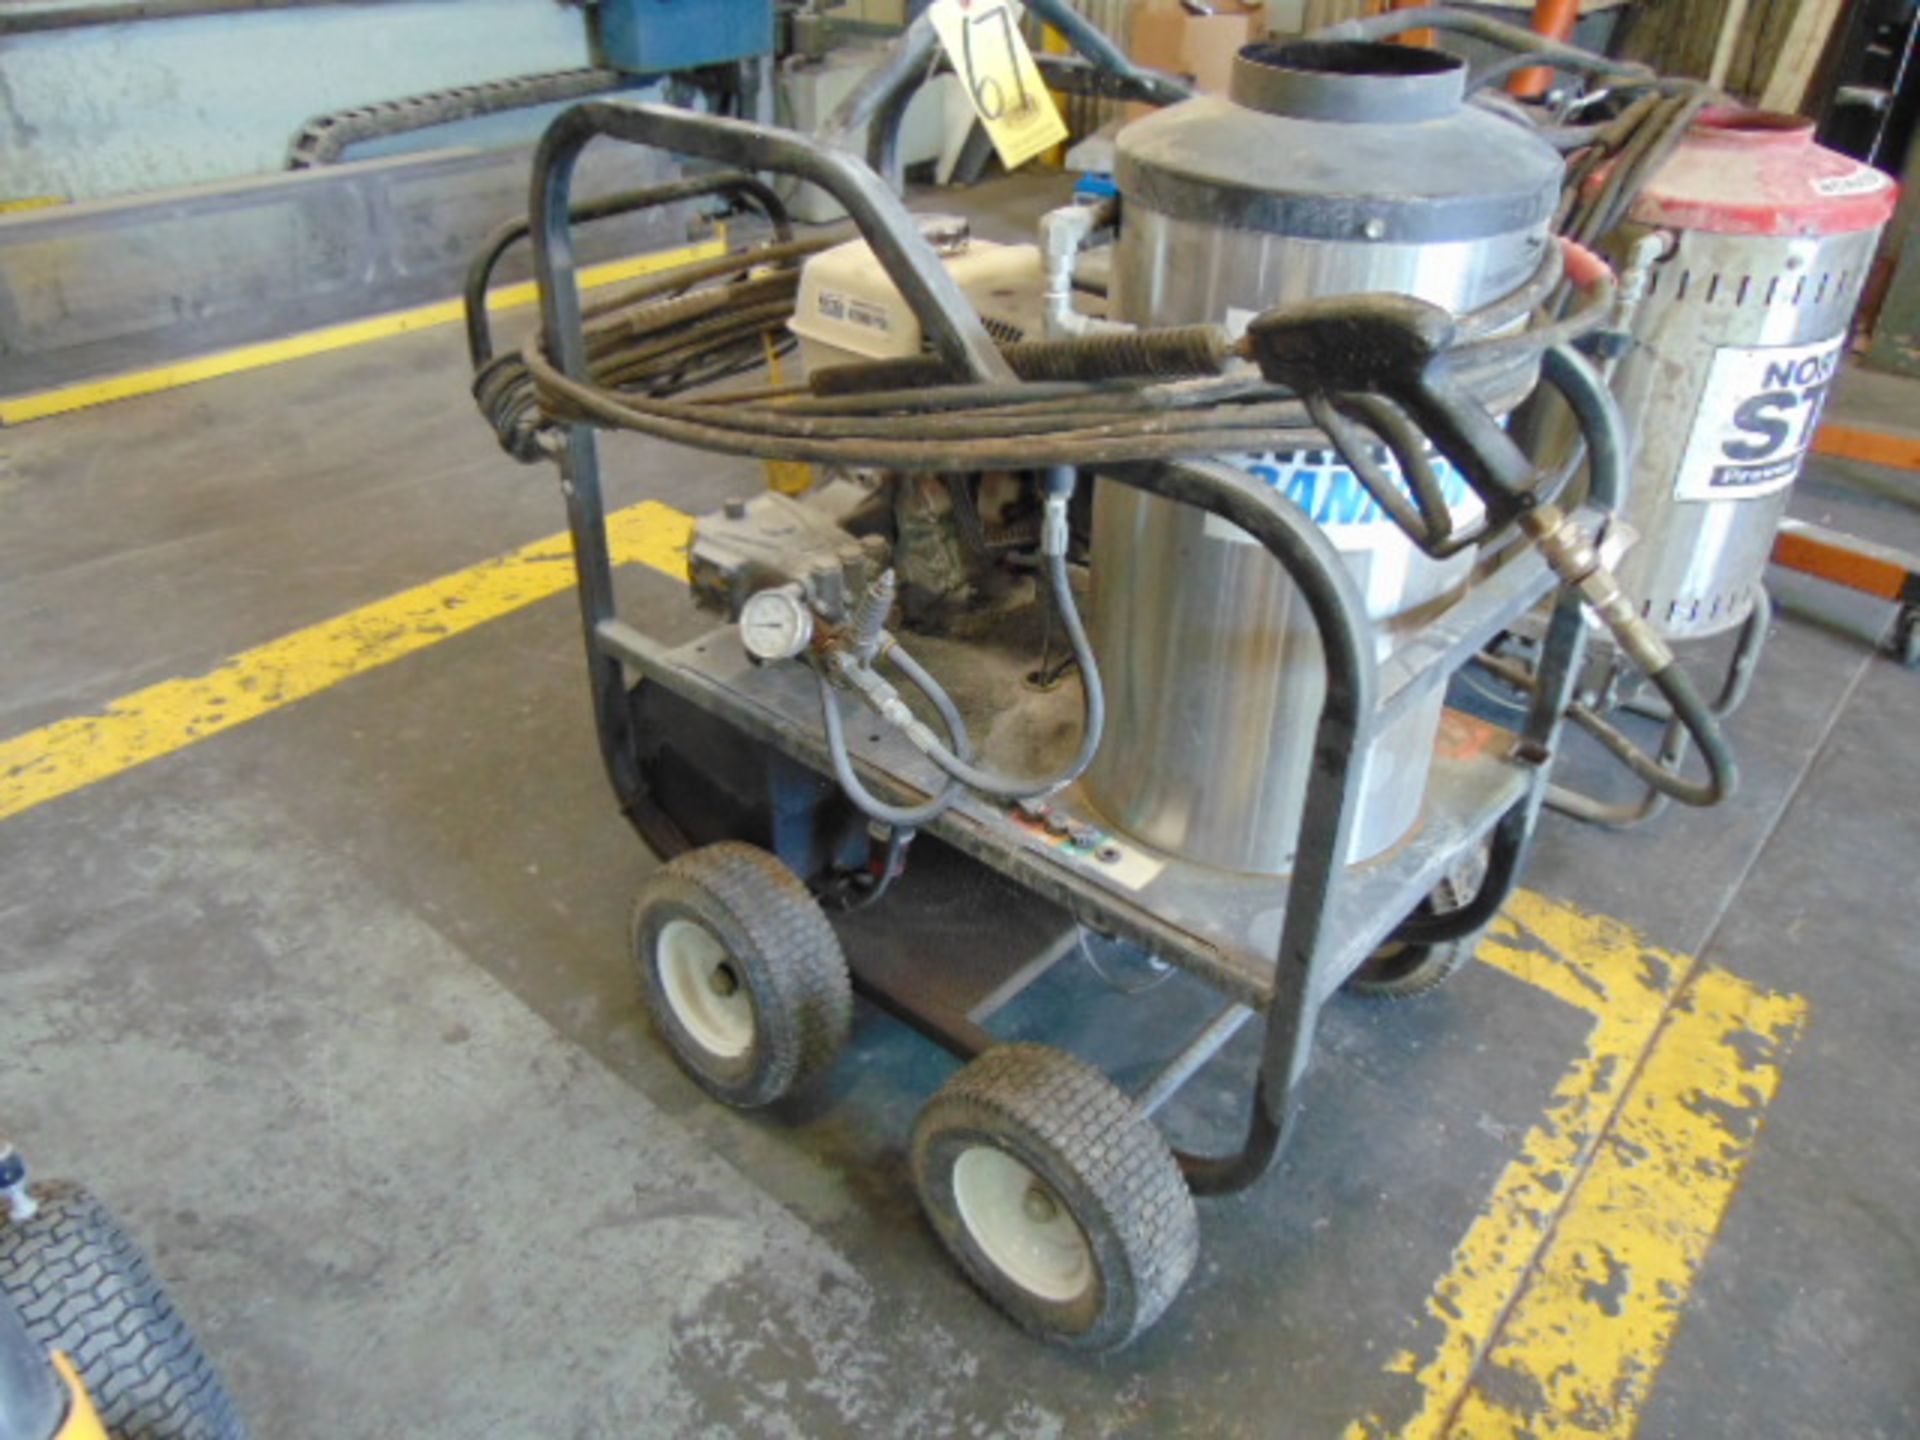 HOT WATER PRESSURE WASHER, WATER CANNON, 4200 PSI, Honda gas engine, electric water heater